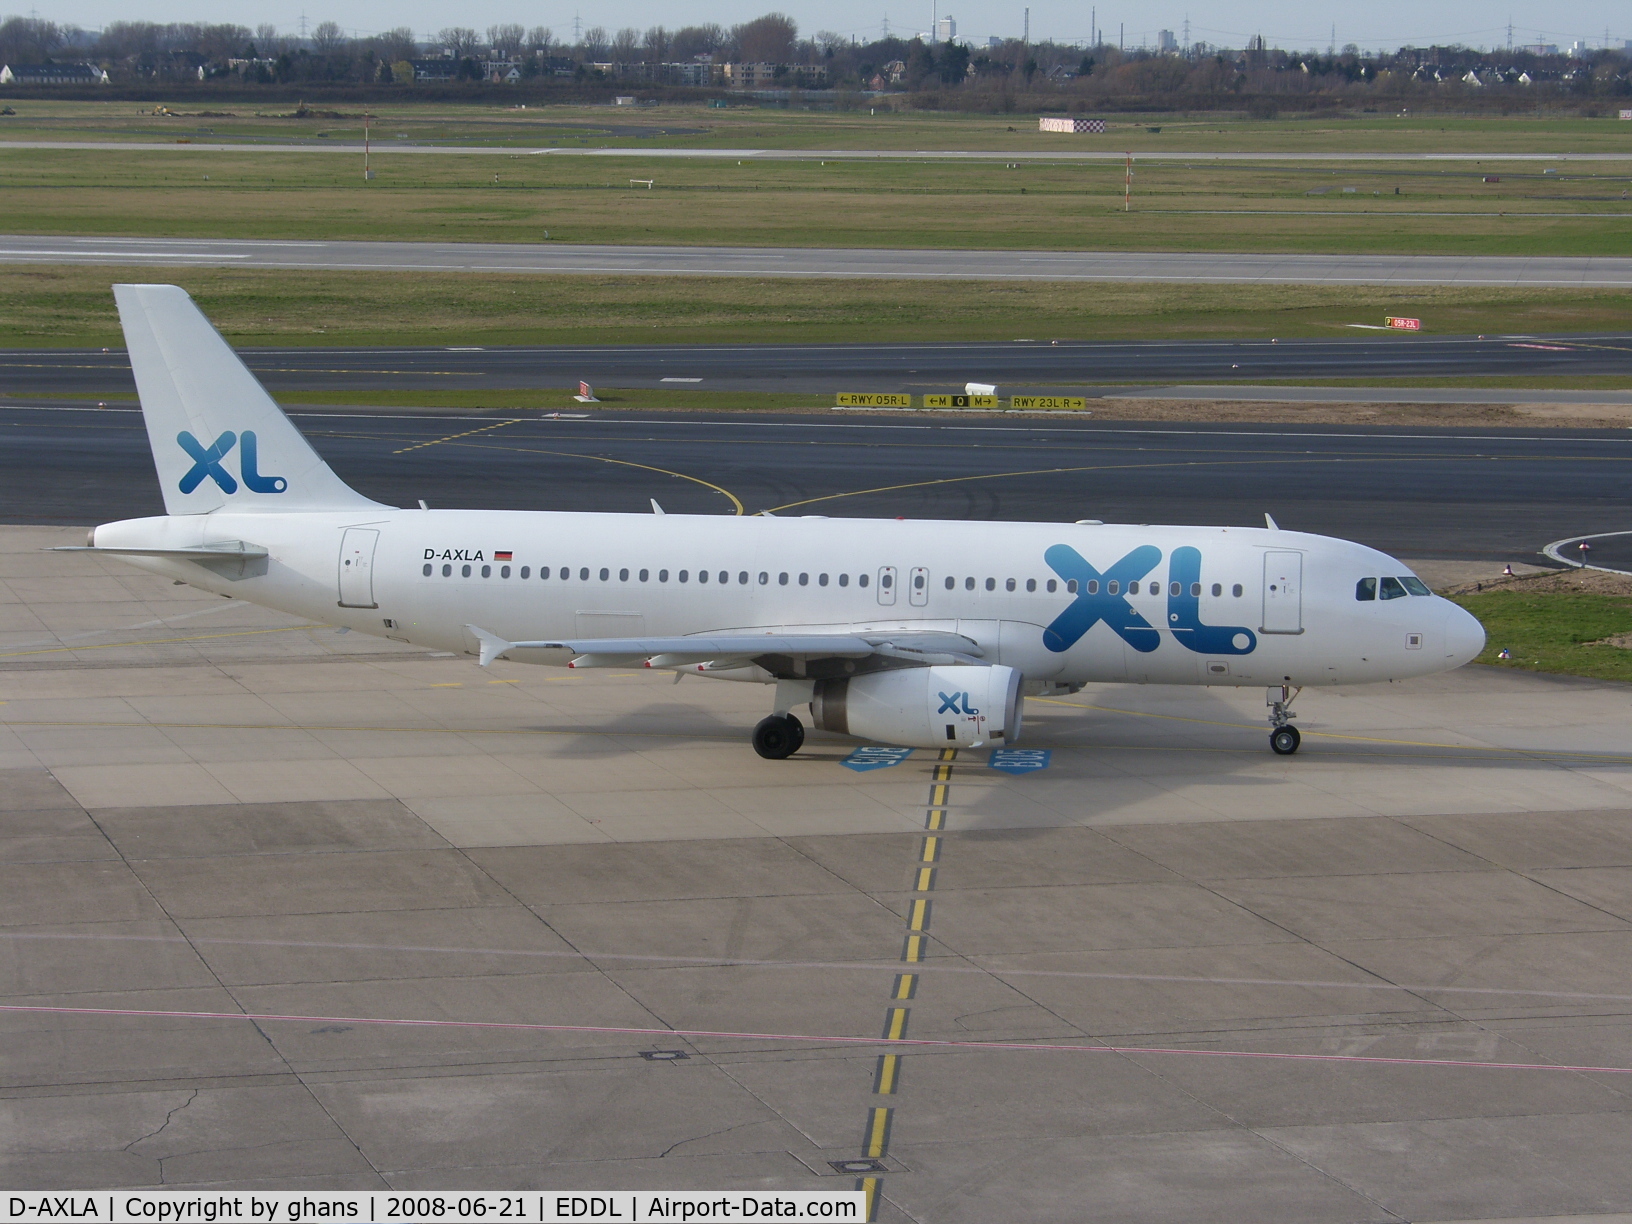 D-AXLA, 2005 Airbus A320-232 C/N 2500, Taxiing to runway 23R